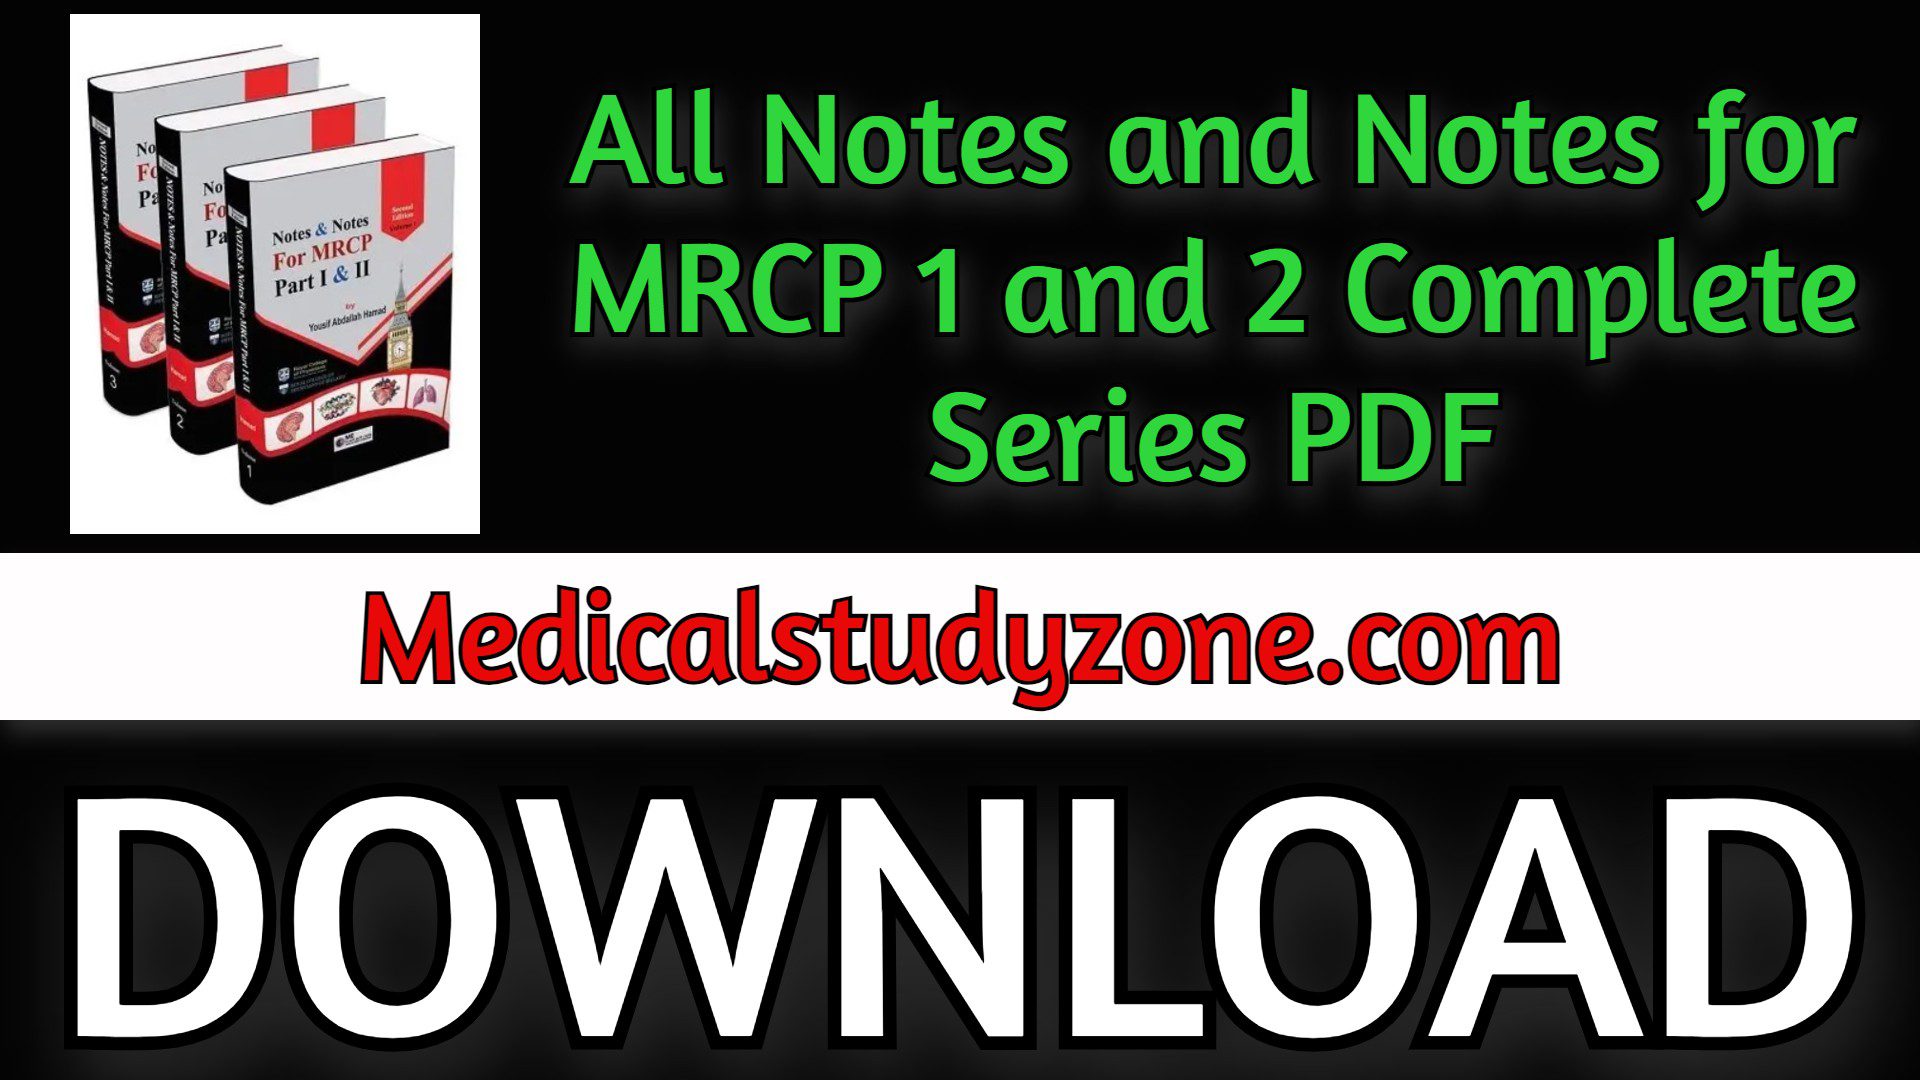 Download All Notes and Notes for MRCP 1 and 2 2023 Complete Series PDF Free